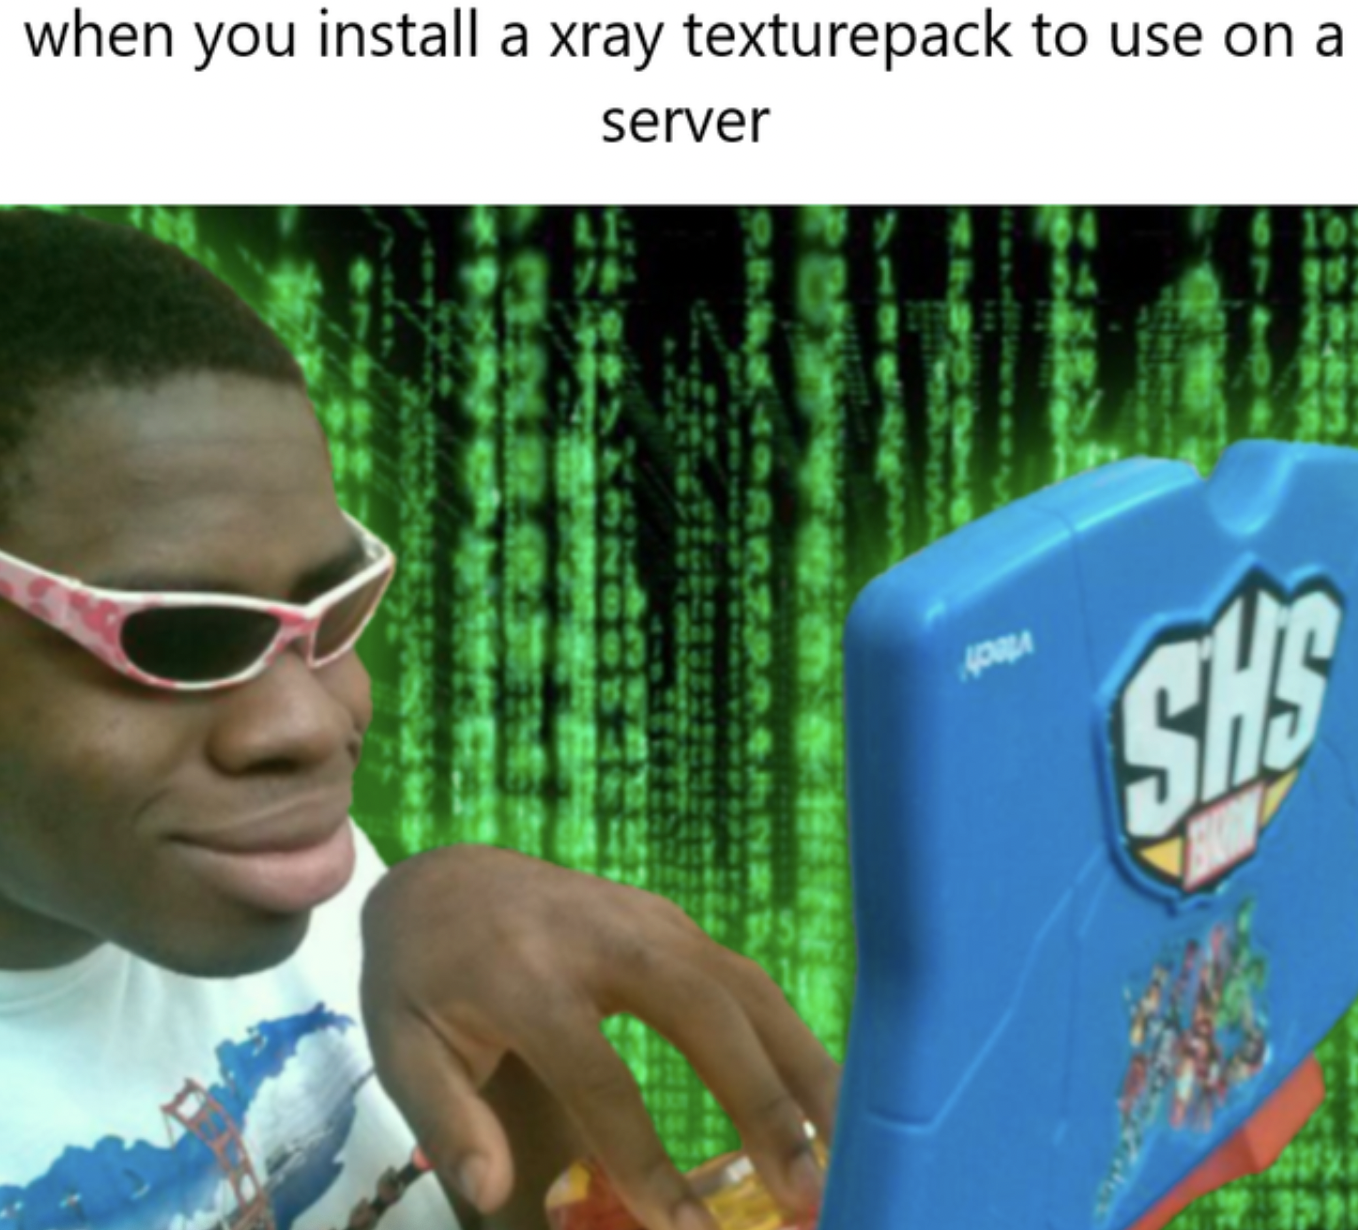 Minecraft Memes - 12 year old me memes - when you install a xray texturepack to use on a server Sh'S